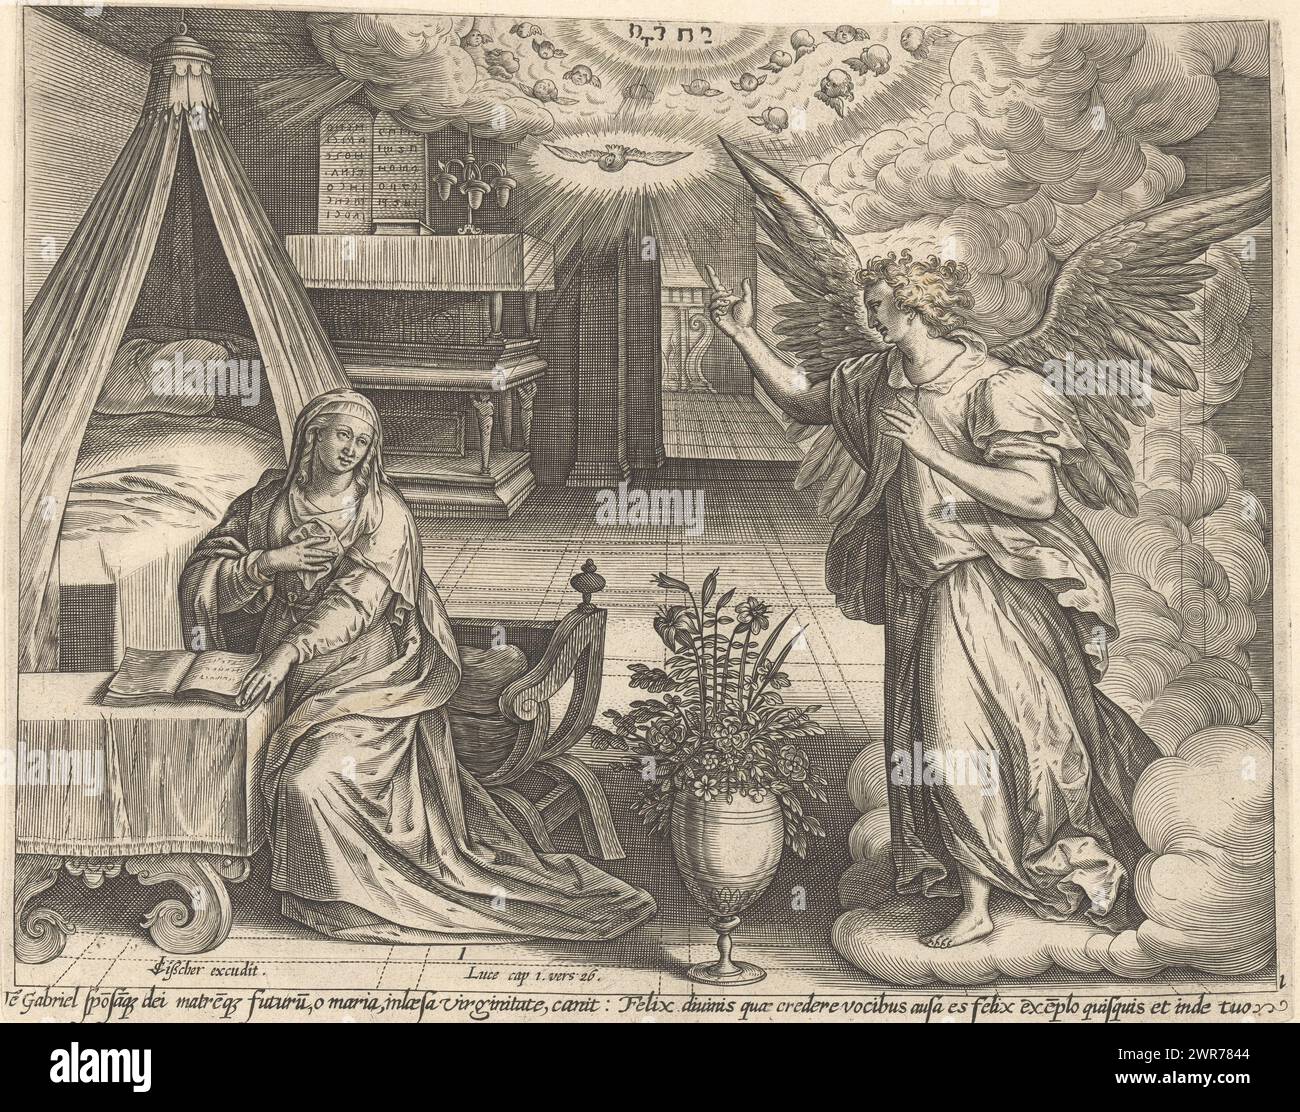 Annunciation, Youth of Christ (series title), Theatrum biblicum (...) (series title), The angel Gabriel announces to Mary that she will become pregnant. Maria is sitting at a table on which an open book lies. A bed on the left. The Holy Spirit descends like a dove. Above it the tetragrammaton as a symbol of God the Father, surrounded by cherubim. Below the scene is a reference in Latin to the Bible text in Luke. 1:26., print maker: anonymous, after design by: Maerten de Vos, publisher: Claes Jansz. Visscher (II), Amsterdam, 1579 and/or 1639, paper, engraving Stock Photo